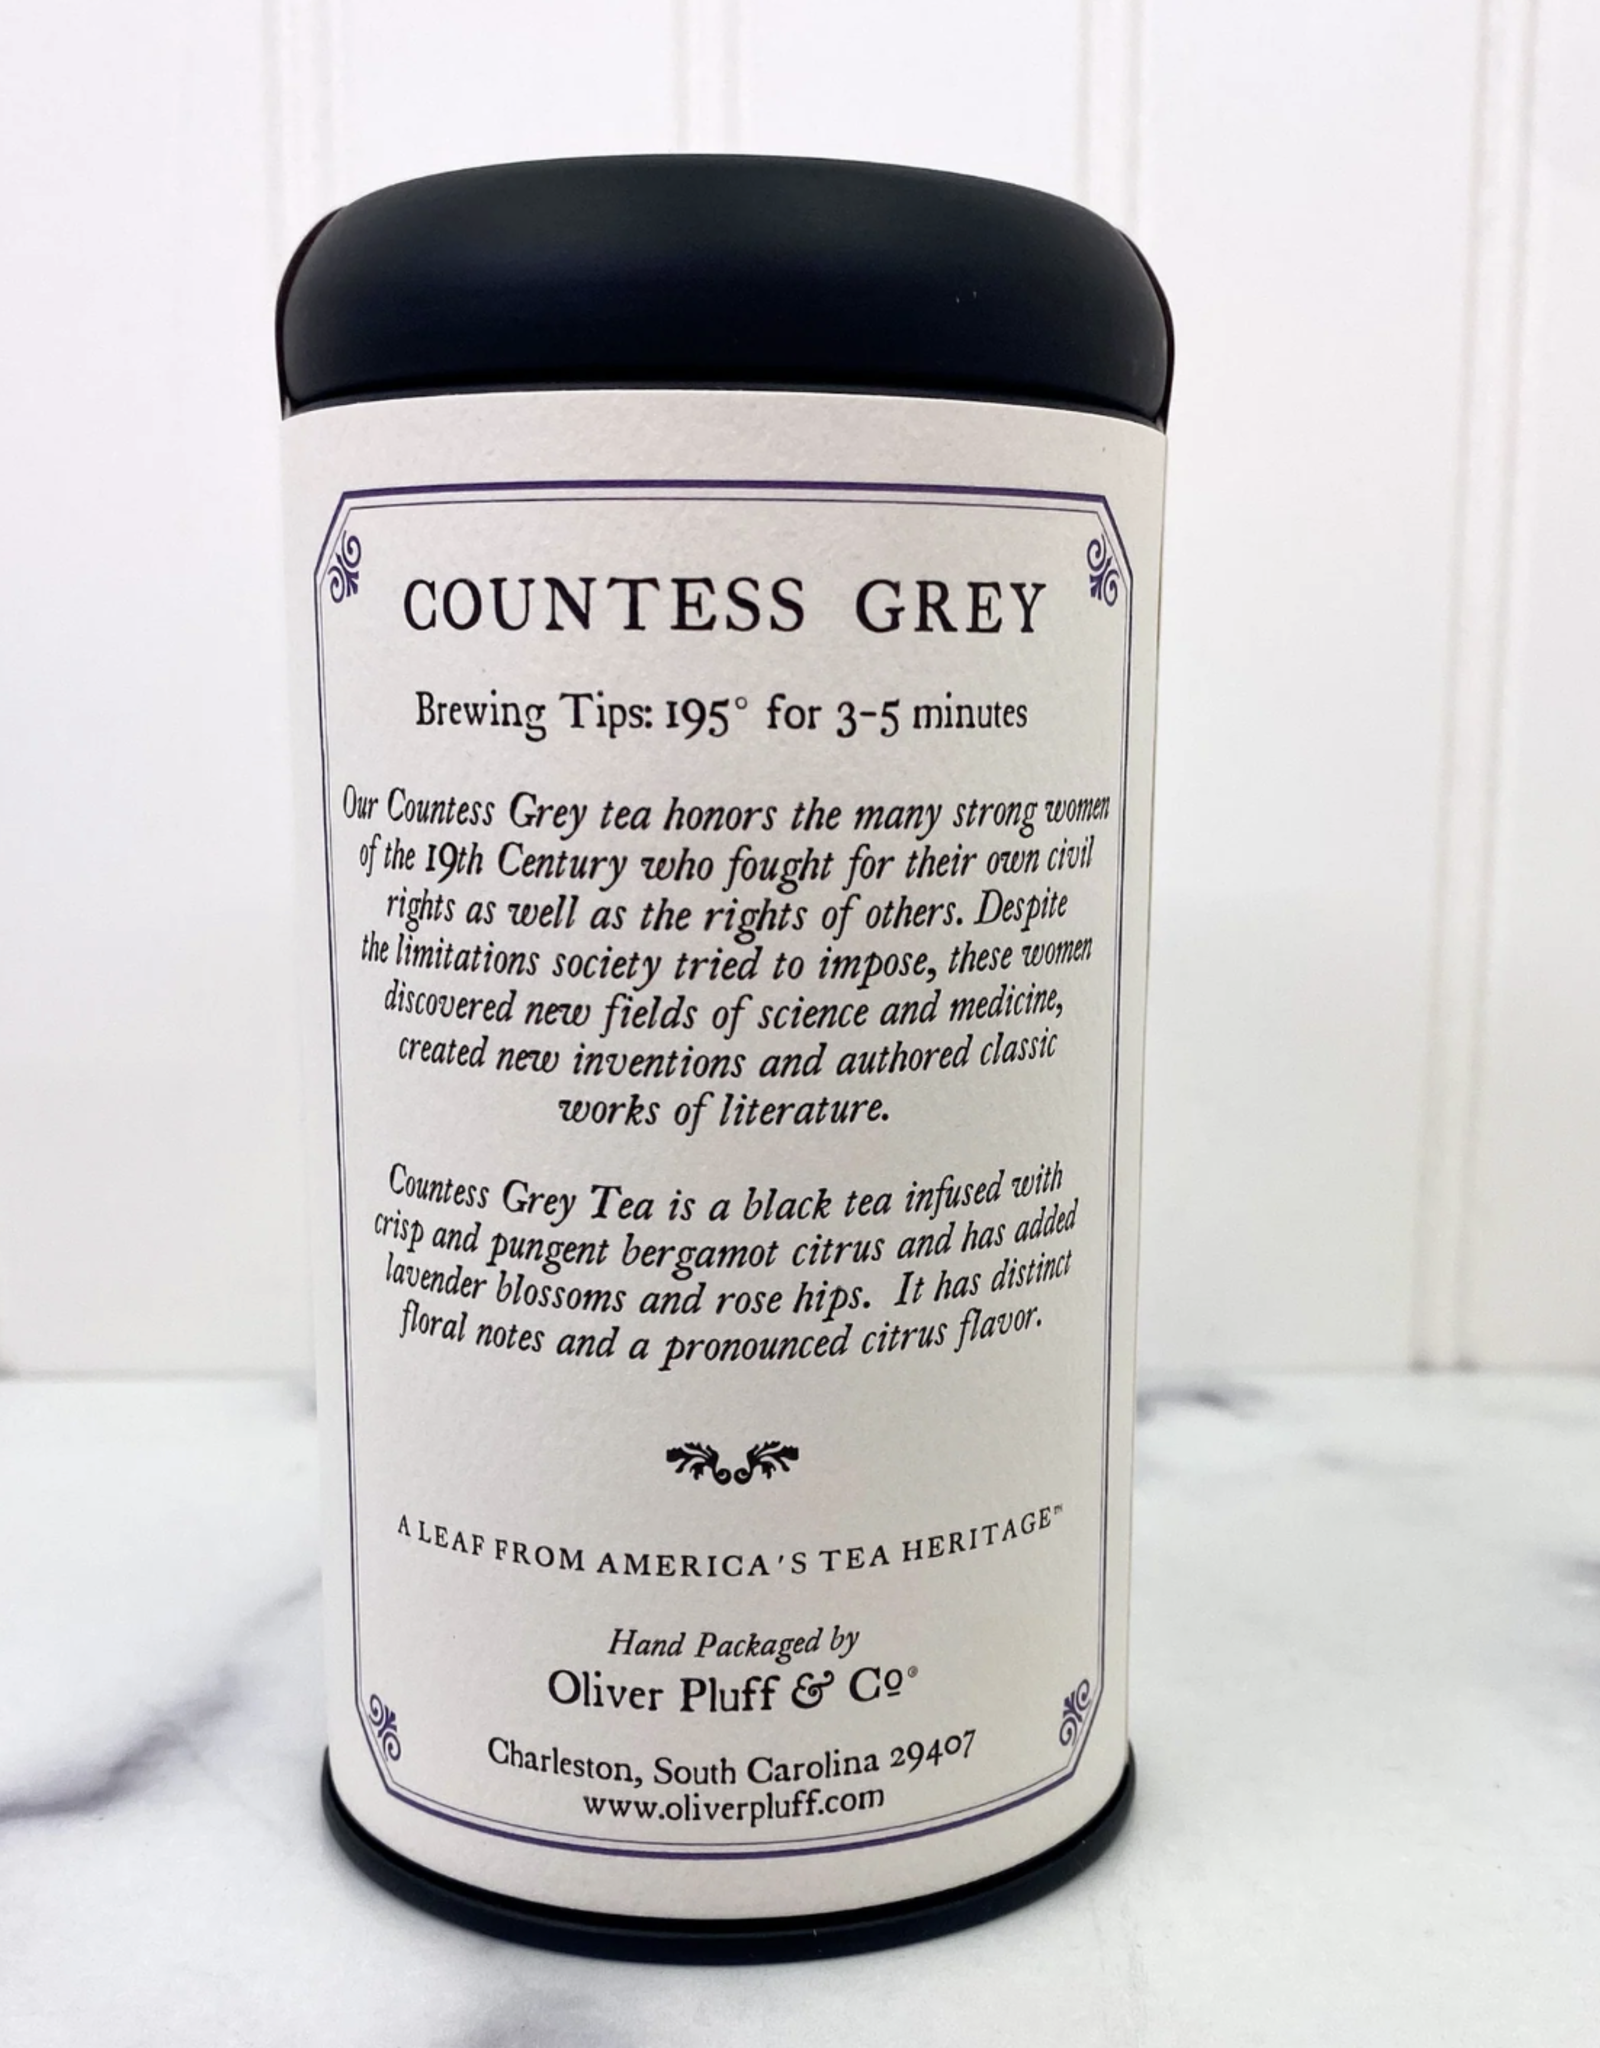 Oliver Pluff & Co Oliver Pluff & Co - Countess Grey Tea (20 Teabags in Signature Tin)